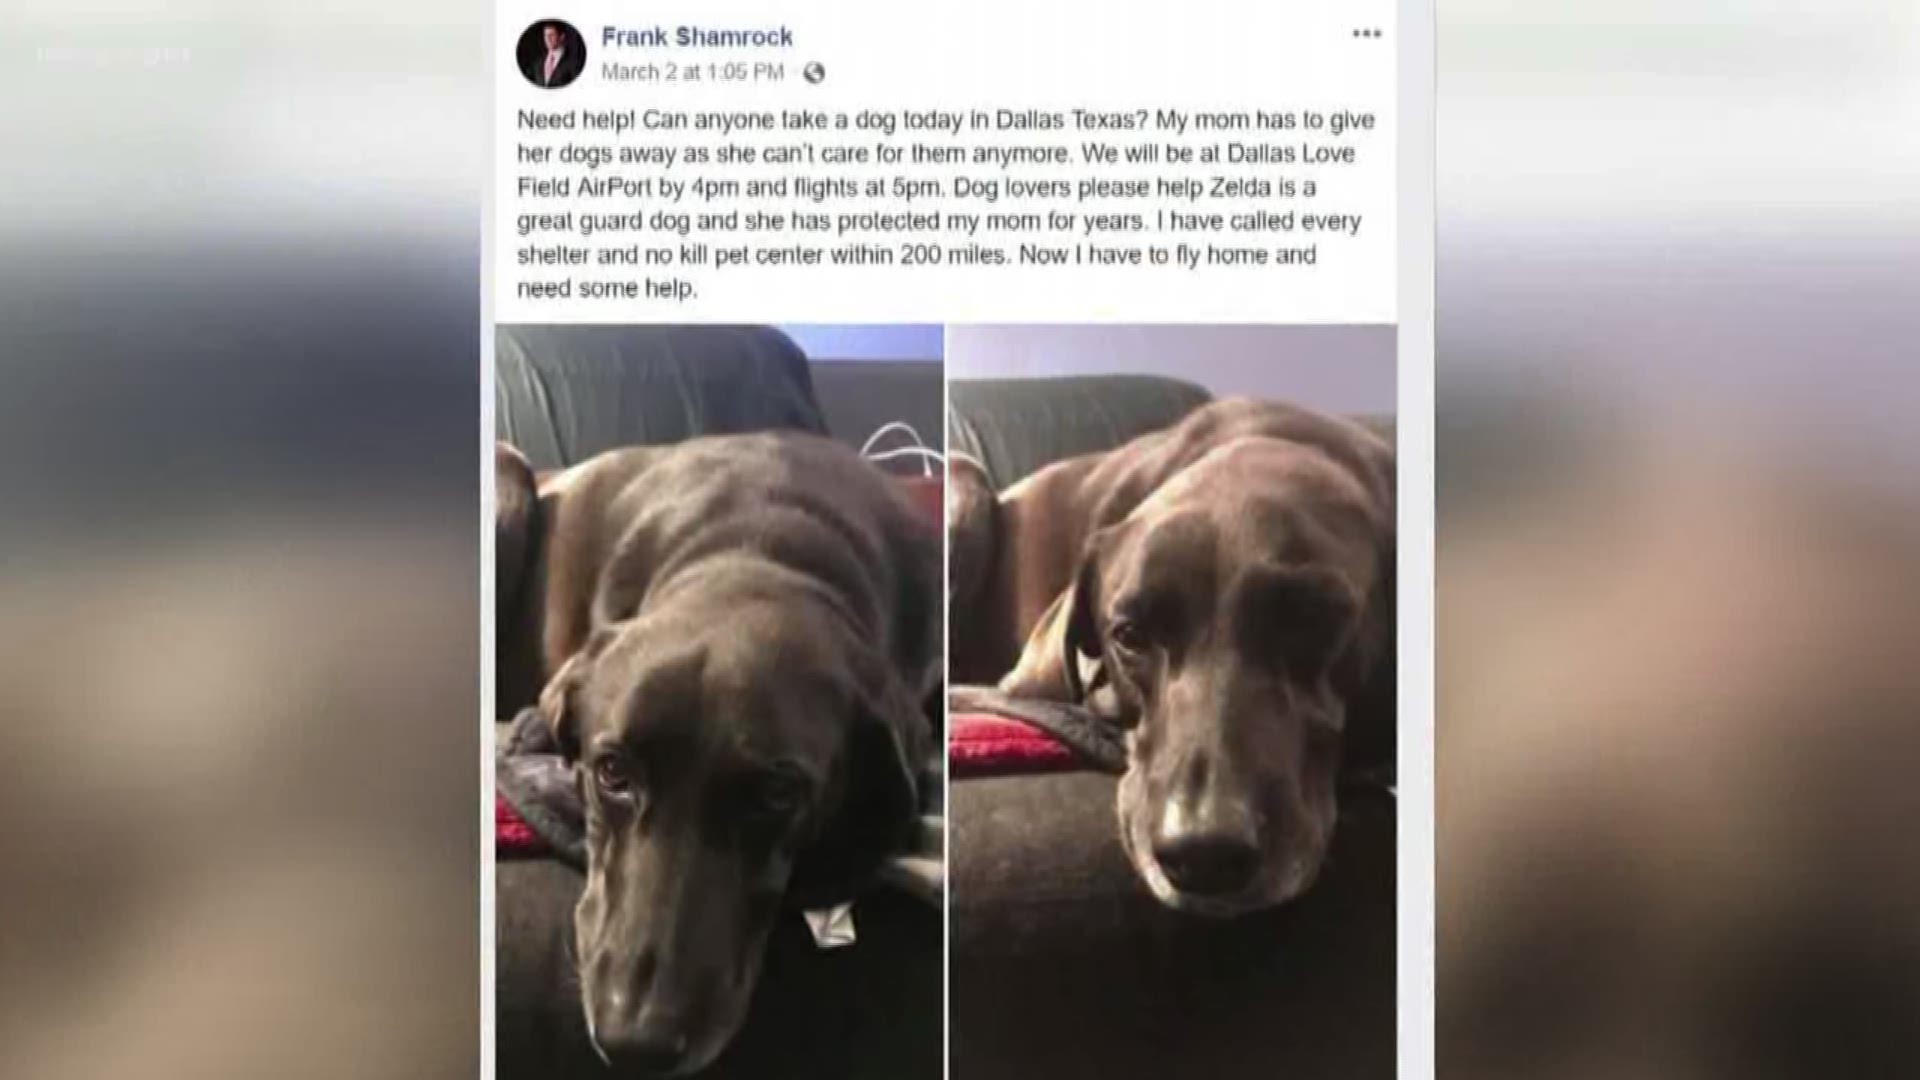 Former UFC Champ Frank Shamrock is under investigation for tying up a dog in back of truck and leaving it at airport.